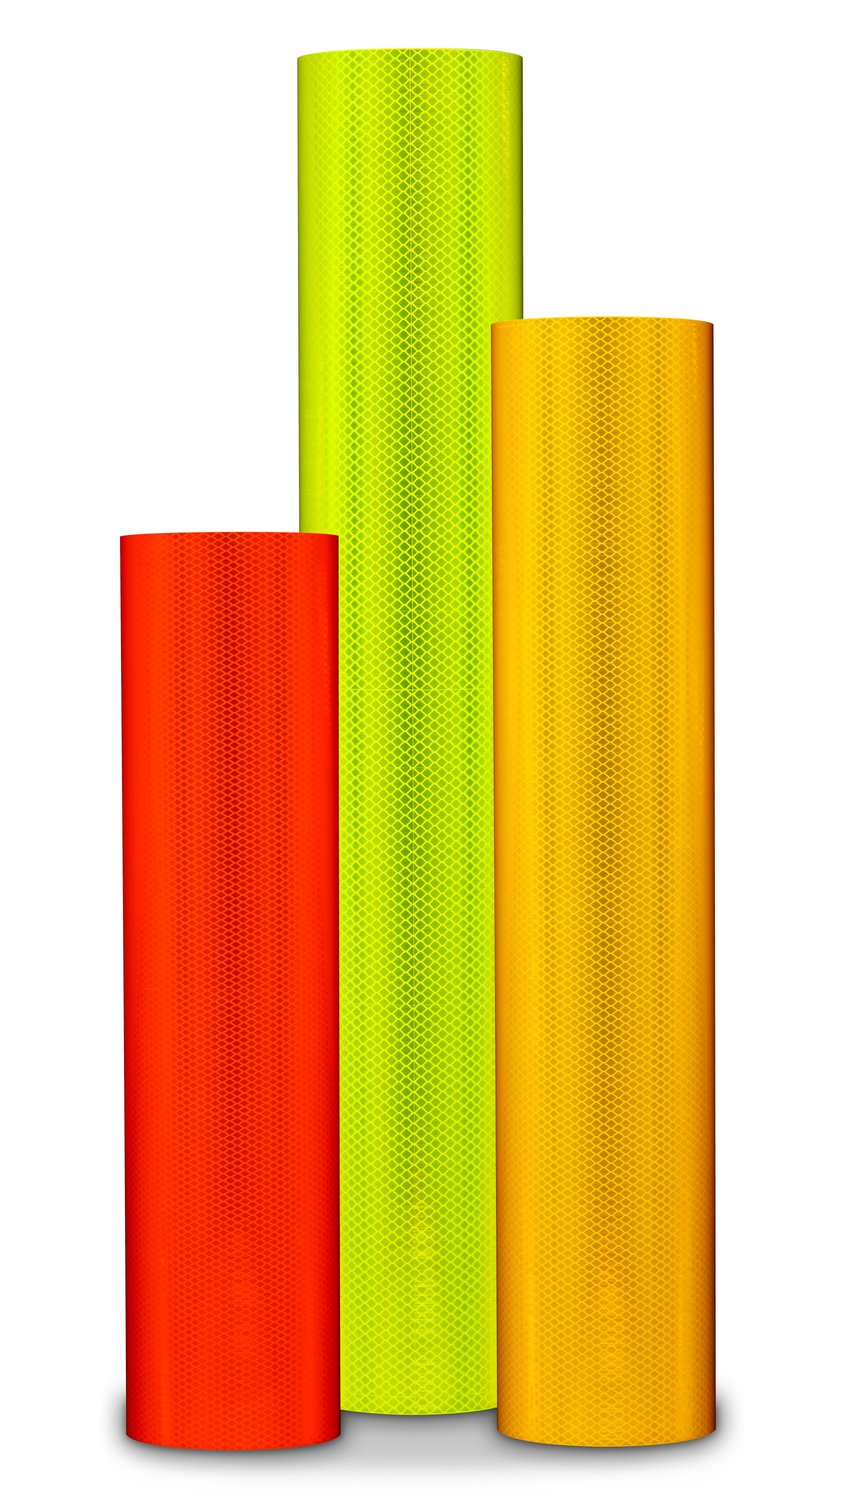 7100152919 - 3M Diamond Grade DG³ Reflective Sheeting 4081 Fluorescent Yellow with
Lead/Trailer, 11.9687 in x 50 yd